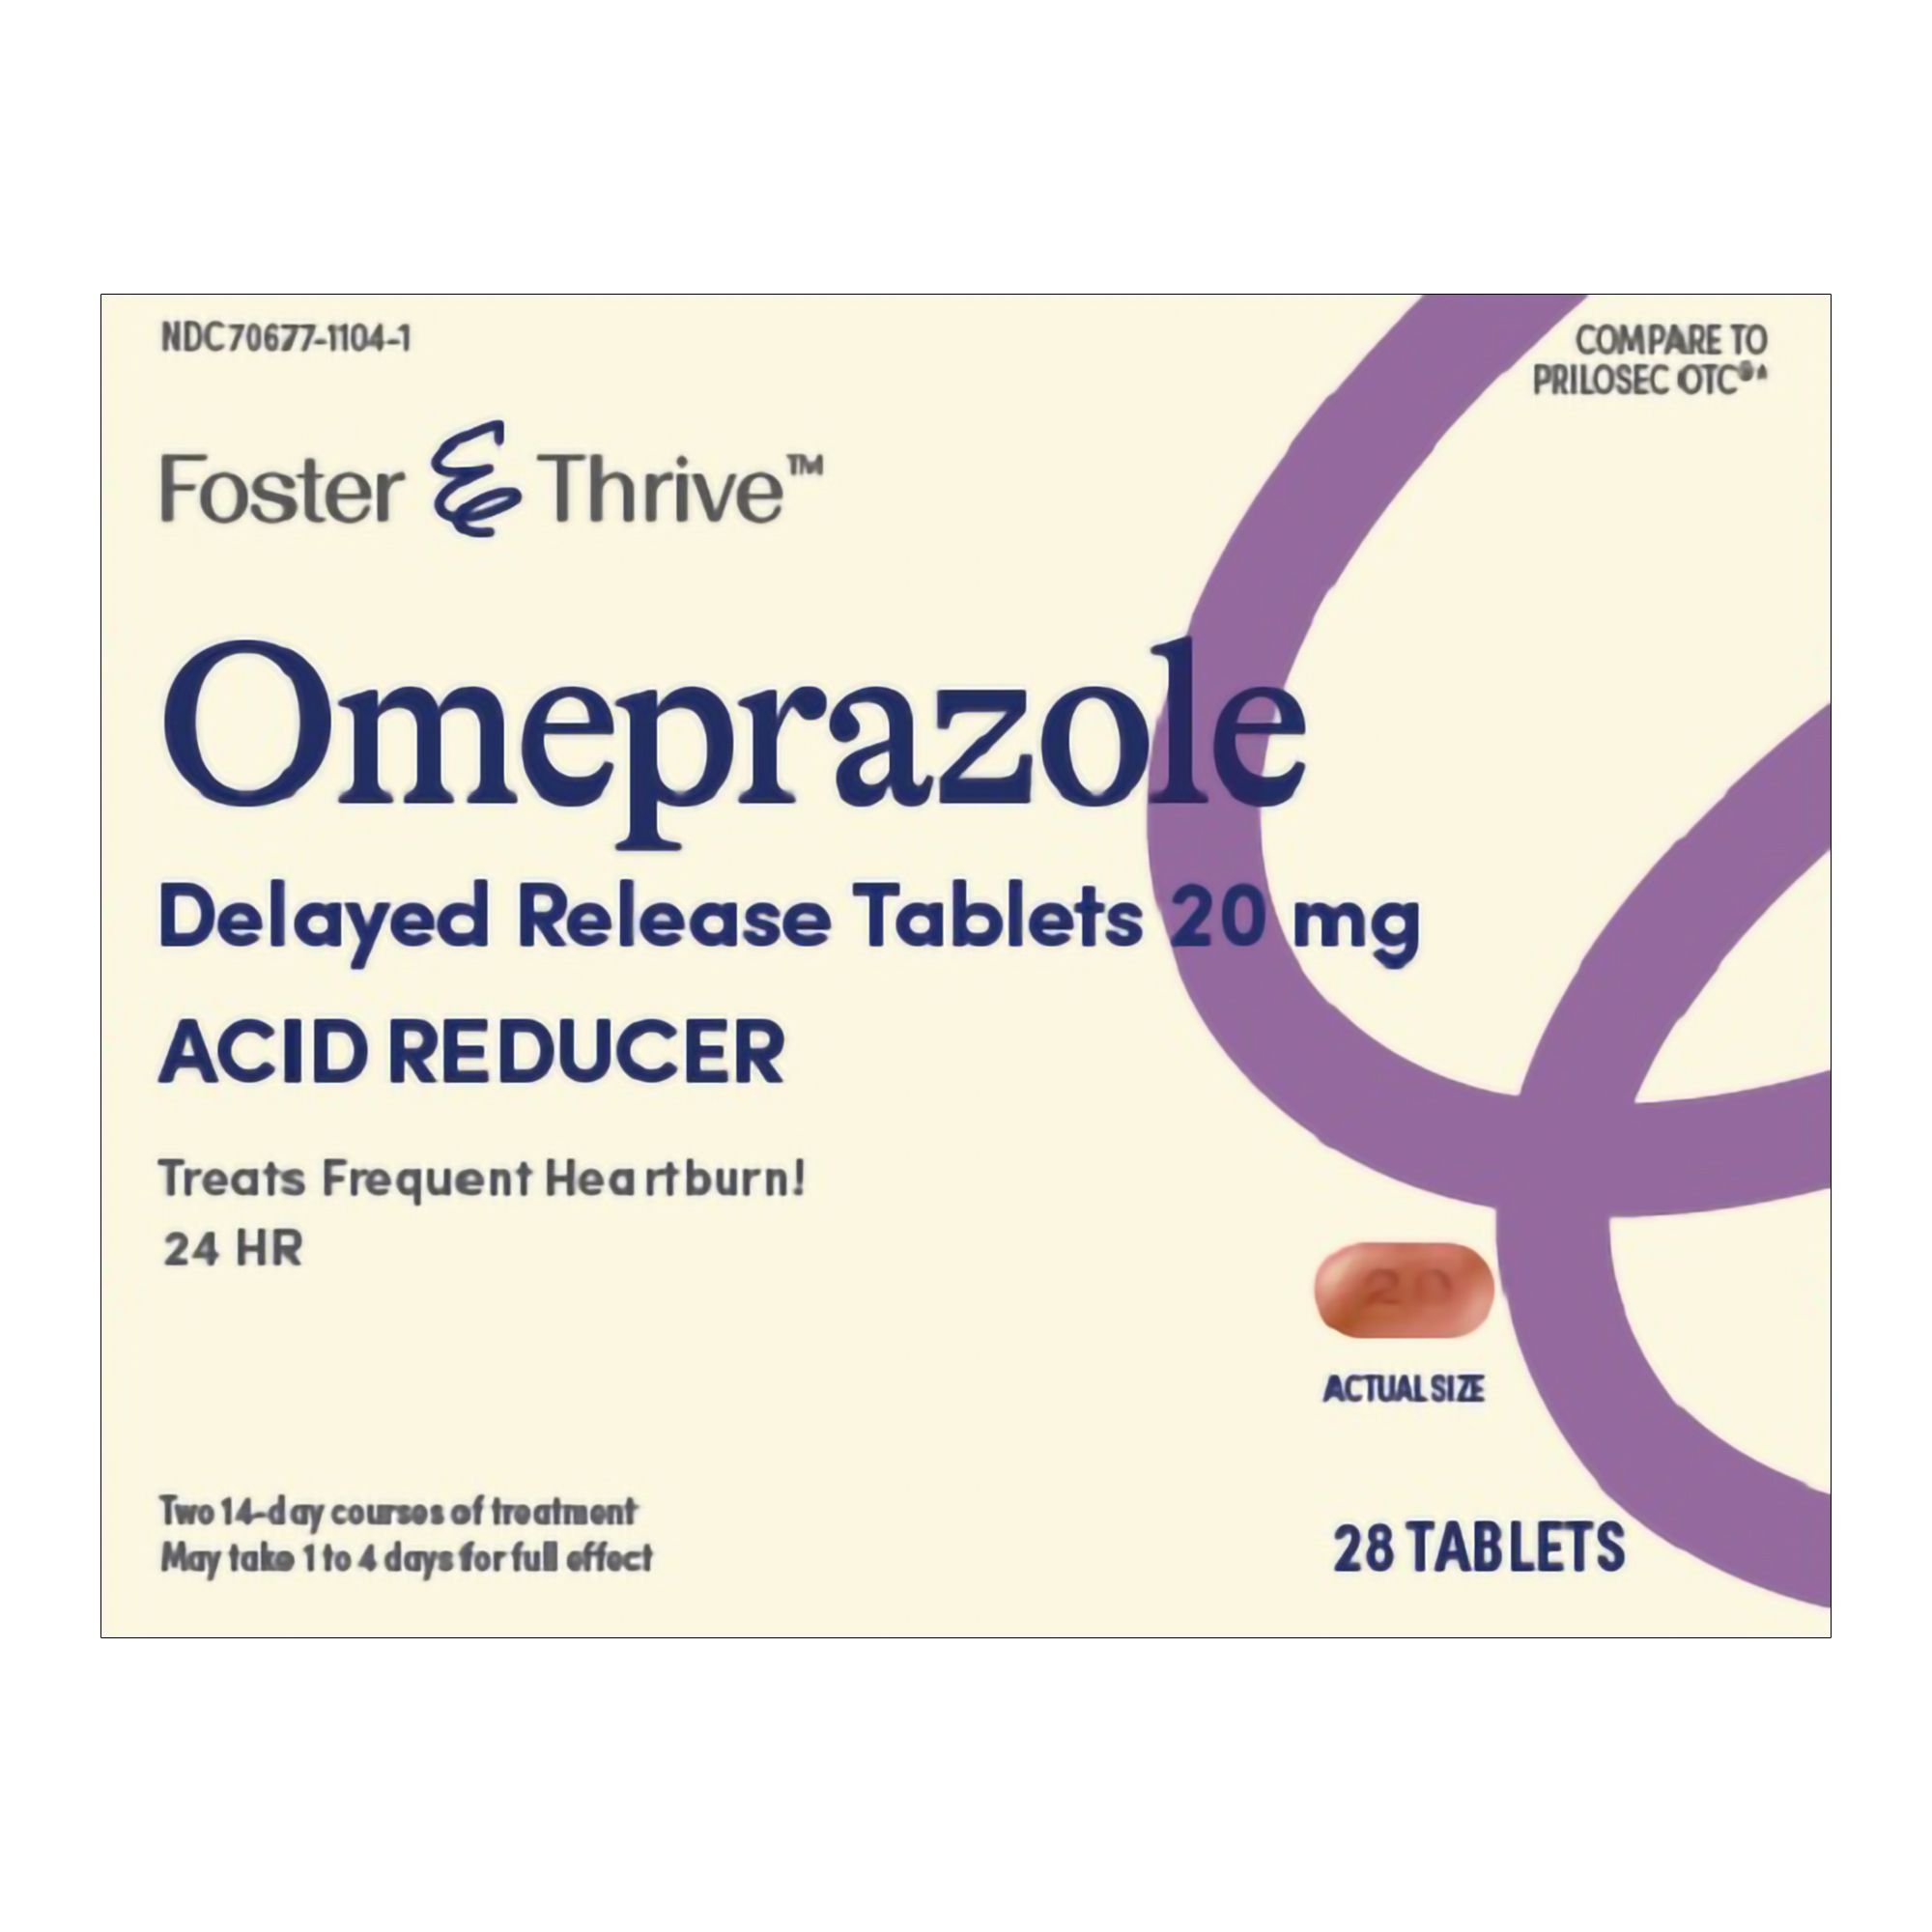 Foster & Thrive Omeprazole Delayed Release Acid Reducer Tablets, 20 mg - 28 ct